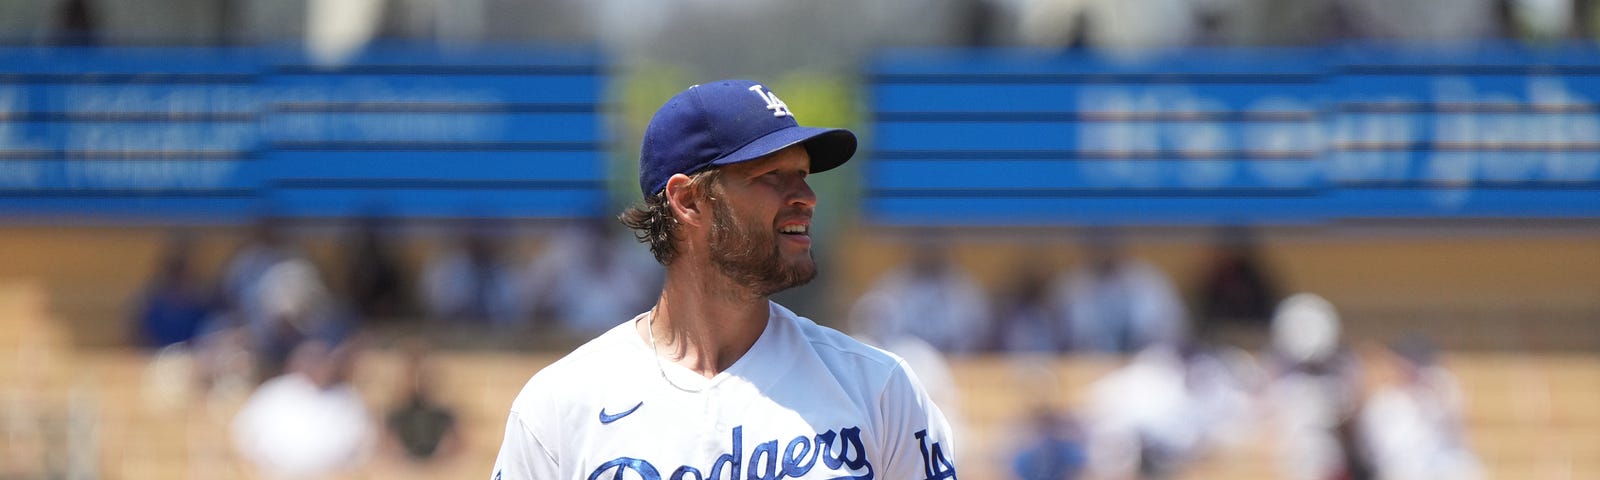 For Kershaw, All-Star Game start is a moment he made, by Cary Osborne